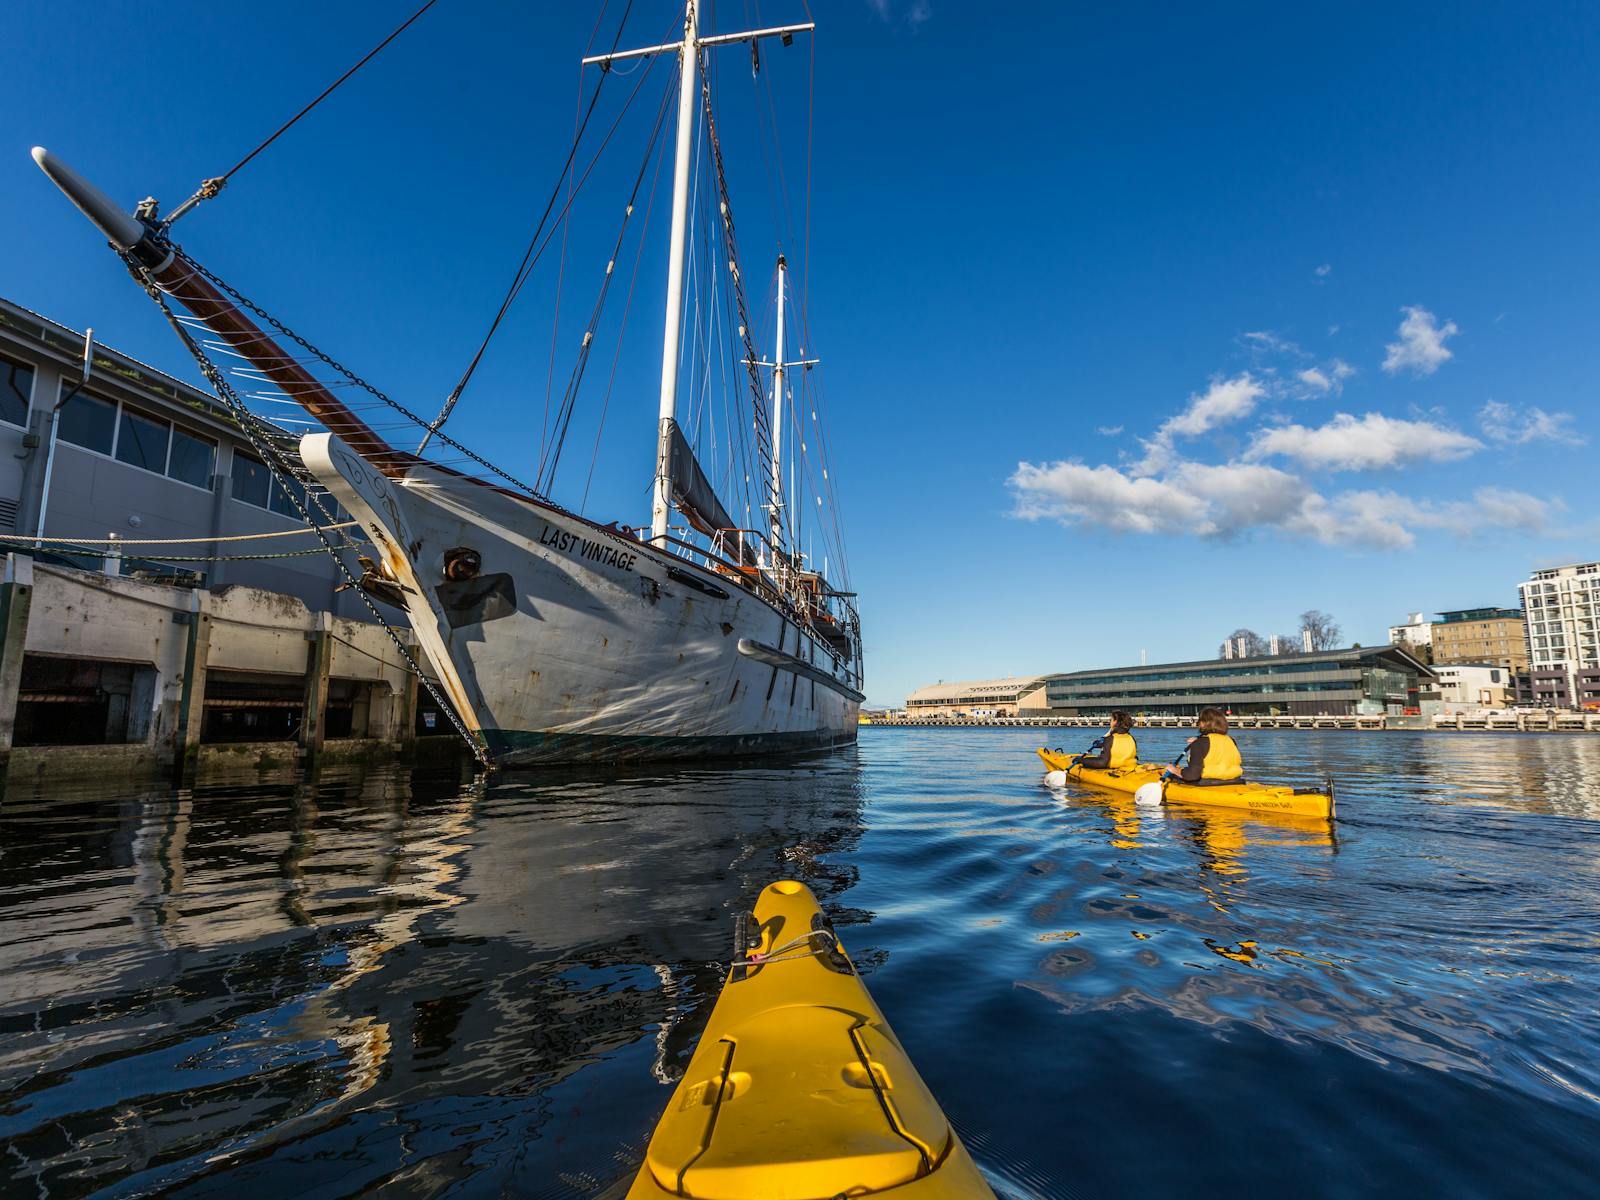 Kayakers paddling beside wooden sailing boat on the Hobart waterfront